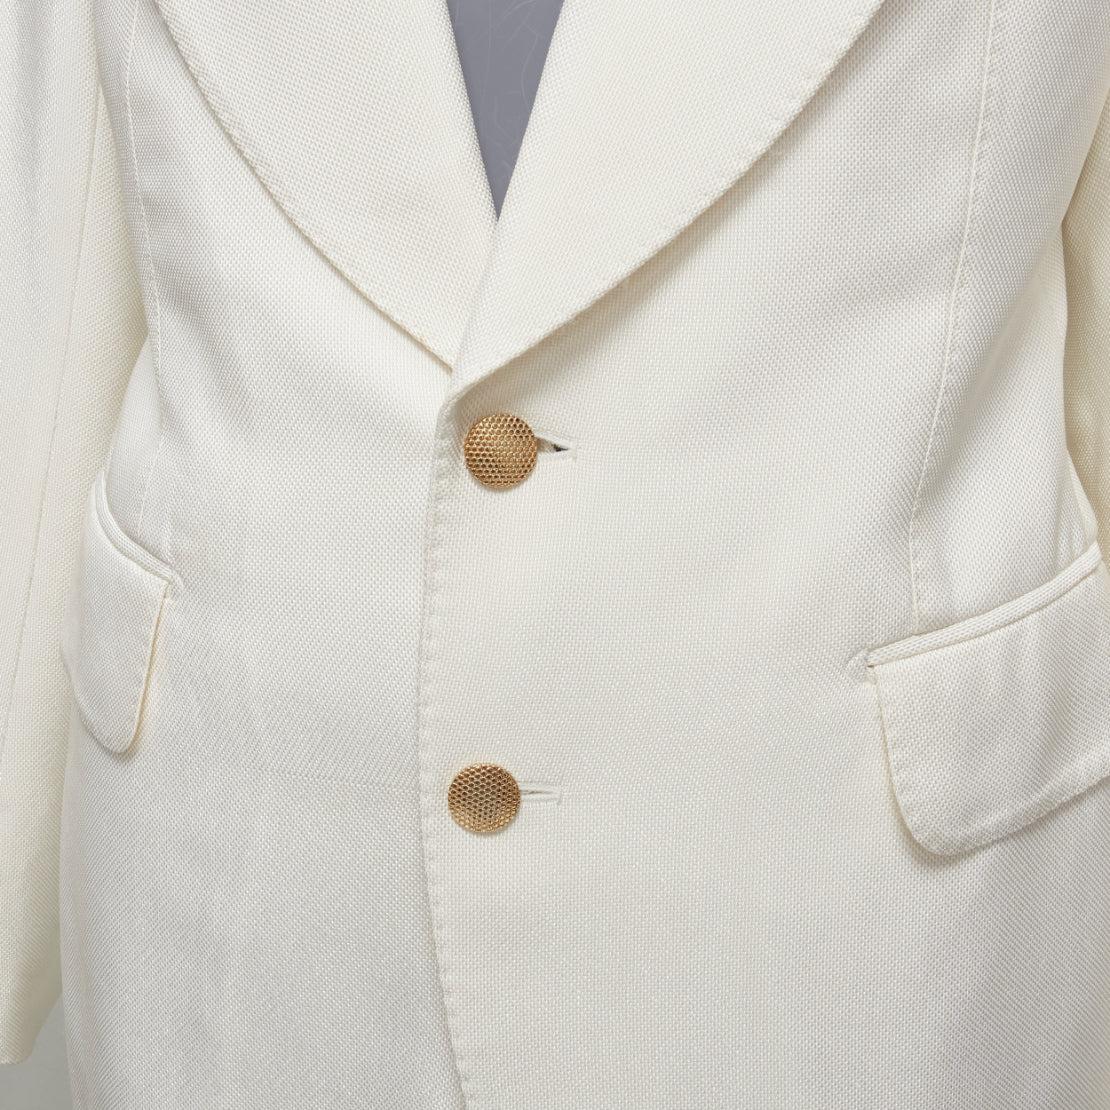 TOM FORD ivory wide lapels gold2- button blazer jacket pants suit IT44 L
Reference: GIYG/A00359
Brand: Tom Ford
Designer: Tom Ford
Material: Viscose
Color: Cream
Pattern: Solid
Closure: Button
Lining: Cream Silk
Extra Details: Gold hardware at